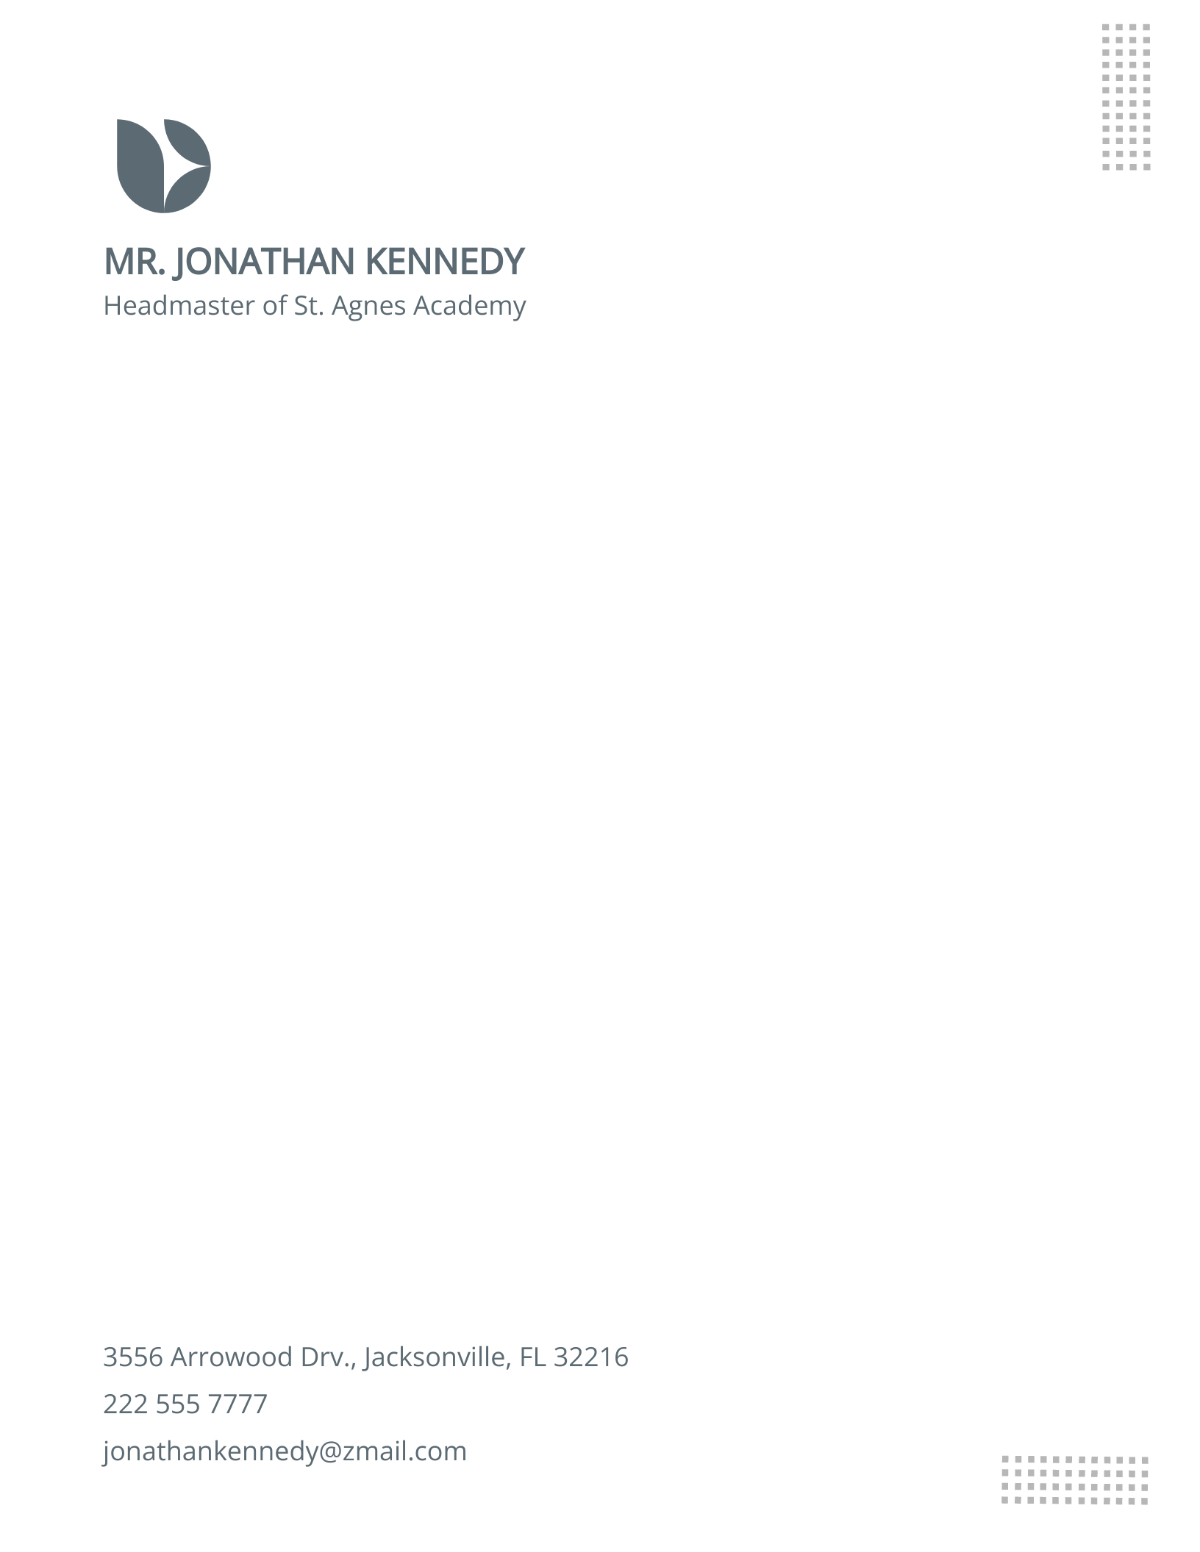 Email Letterhead Template